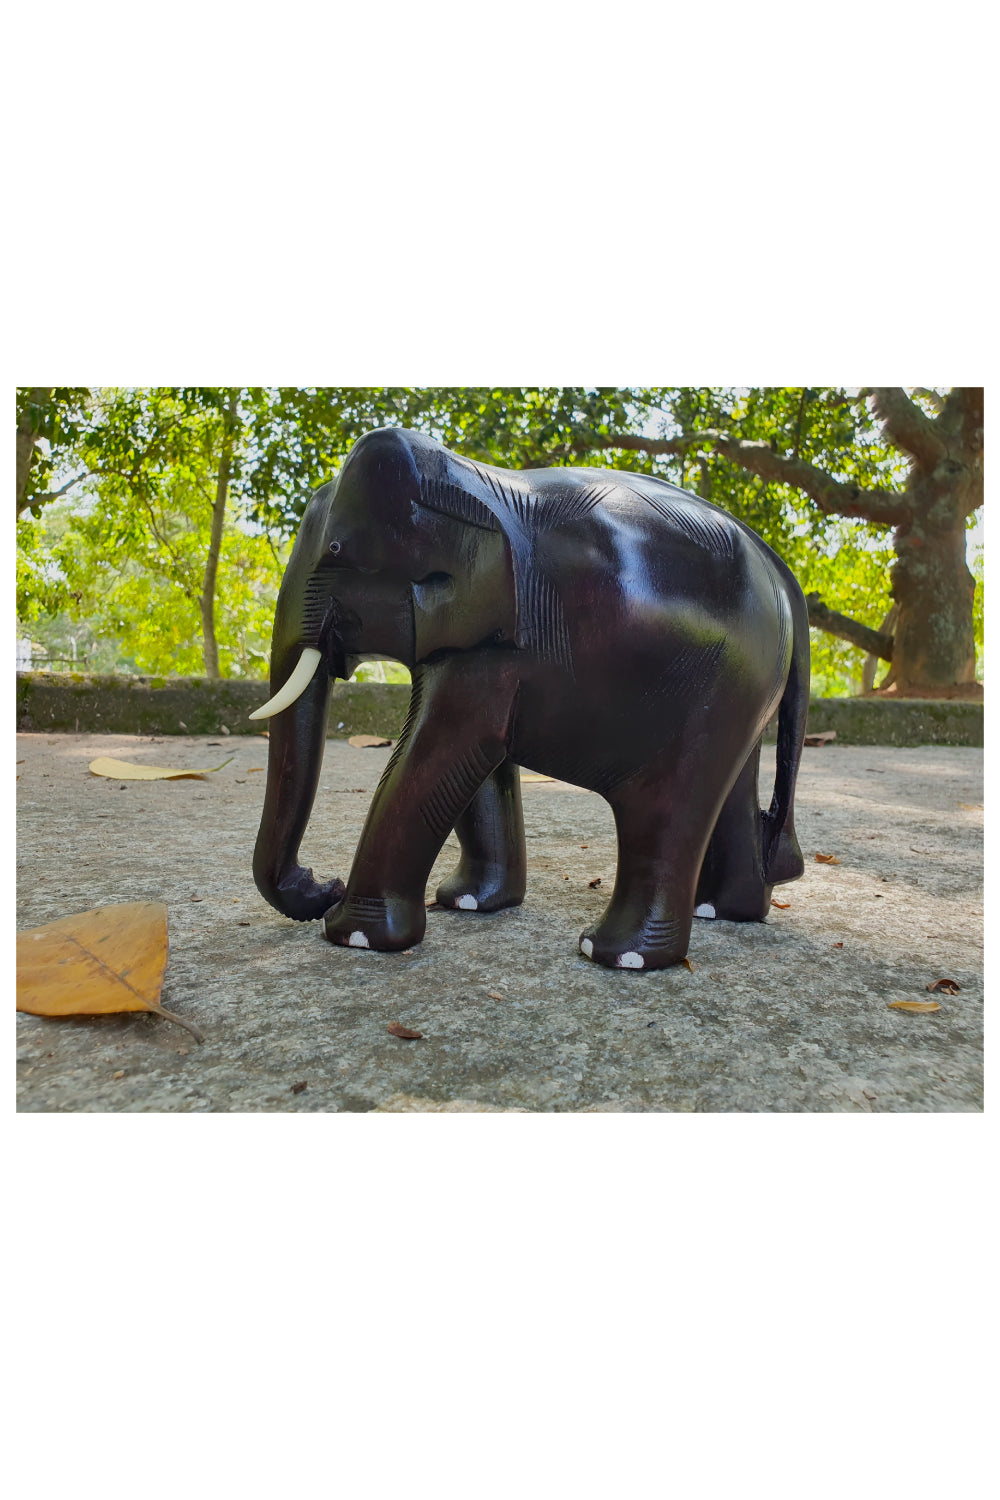 Southloom Handmade Elephant Handicraft (Carved from Mahogany Wood) 8 Inches